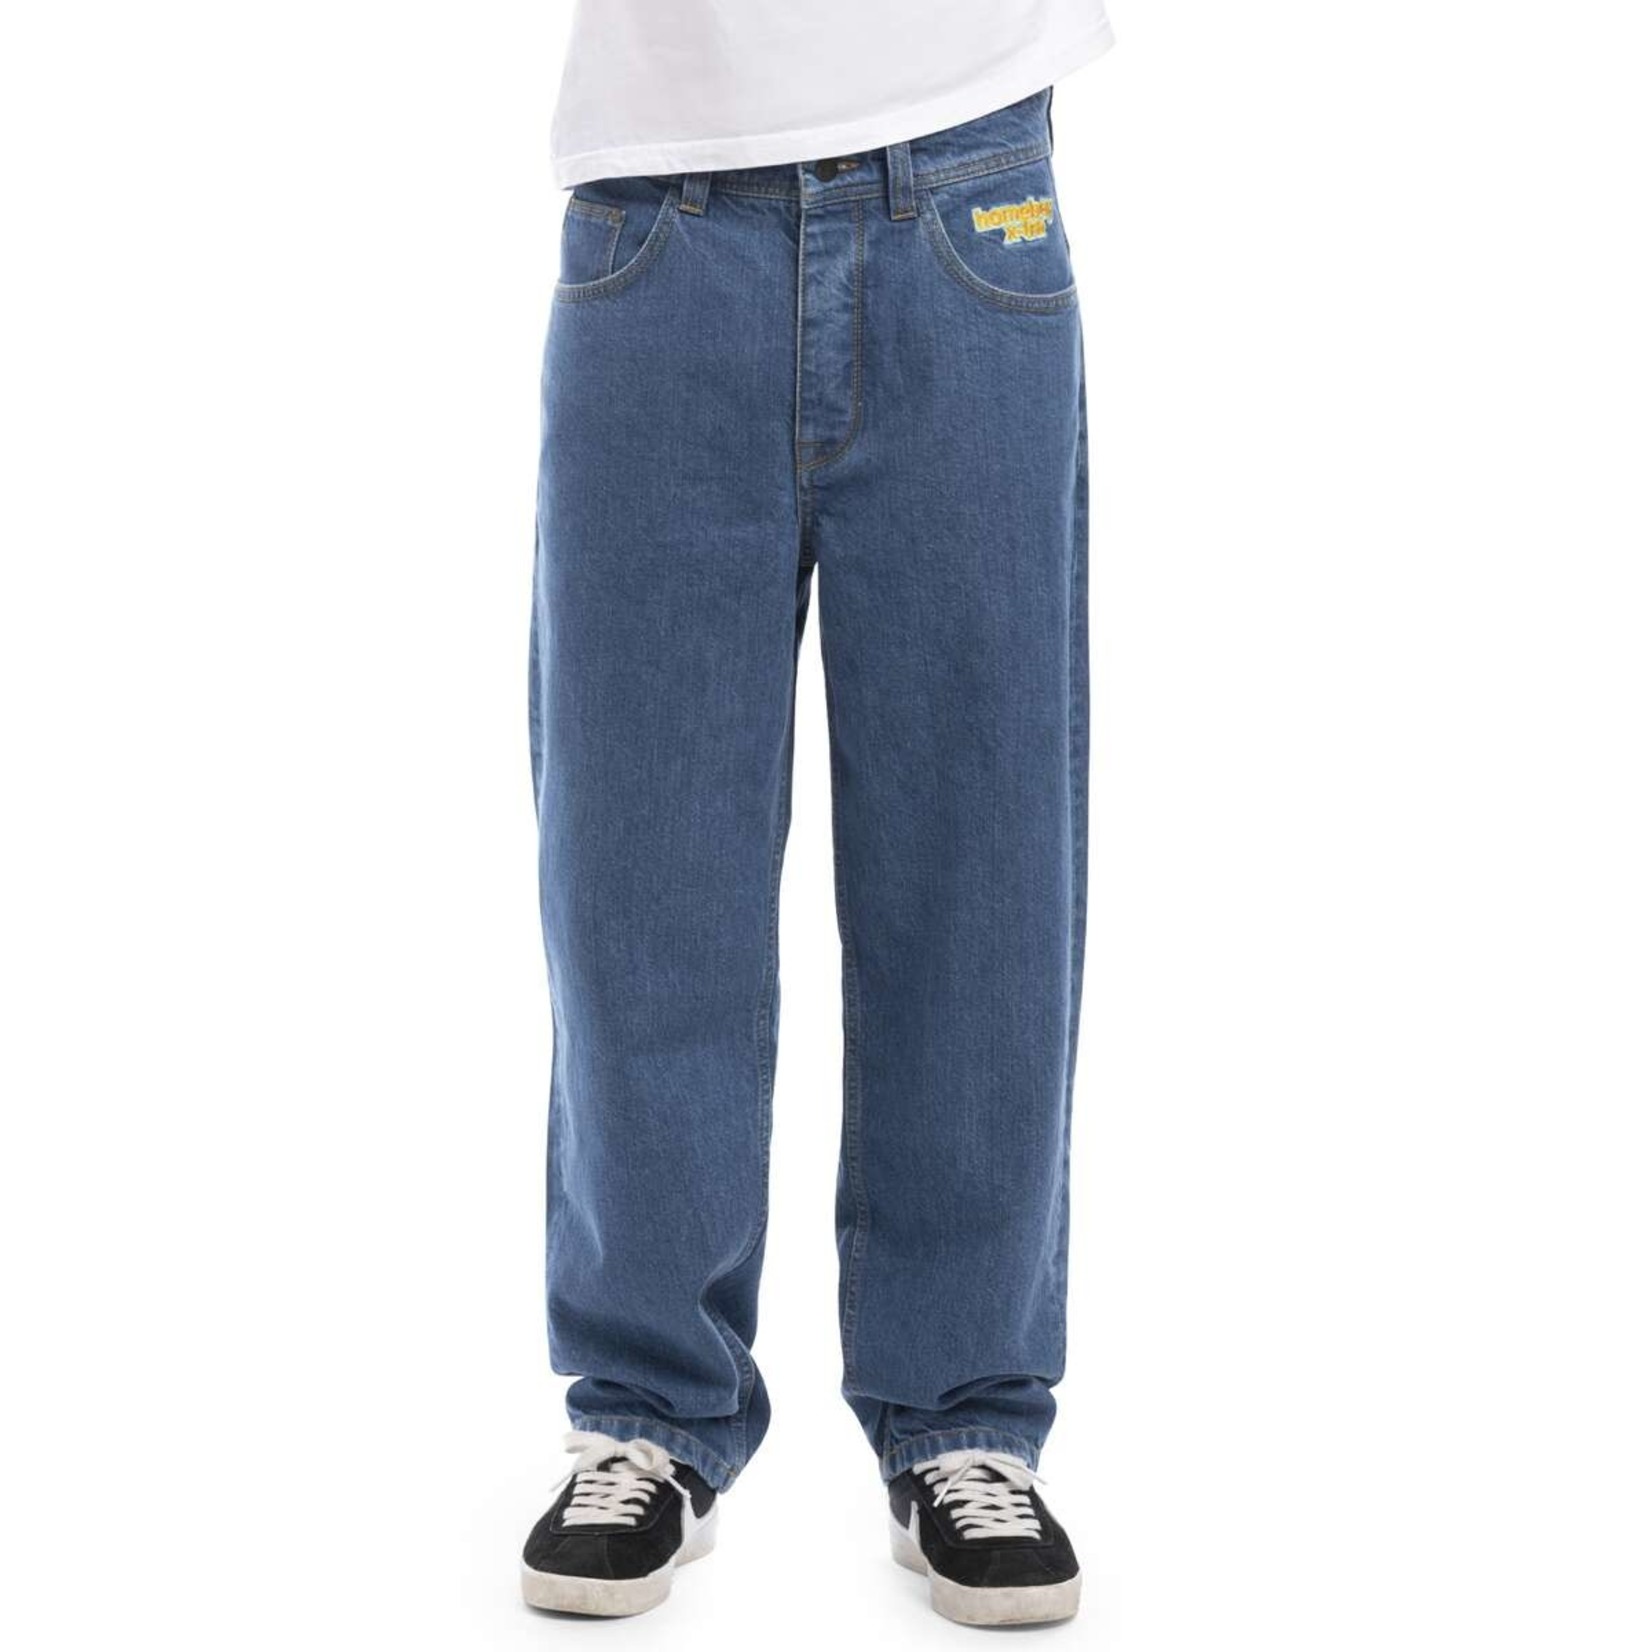 HOMEBOY HOMEBOY X-TRA BAGGY Jean Washed Blue